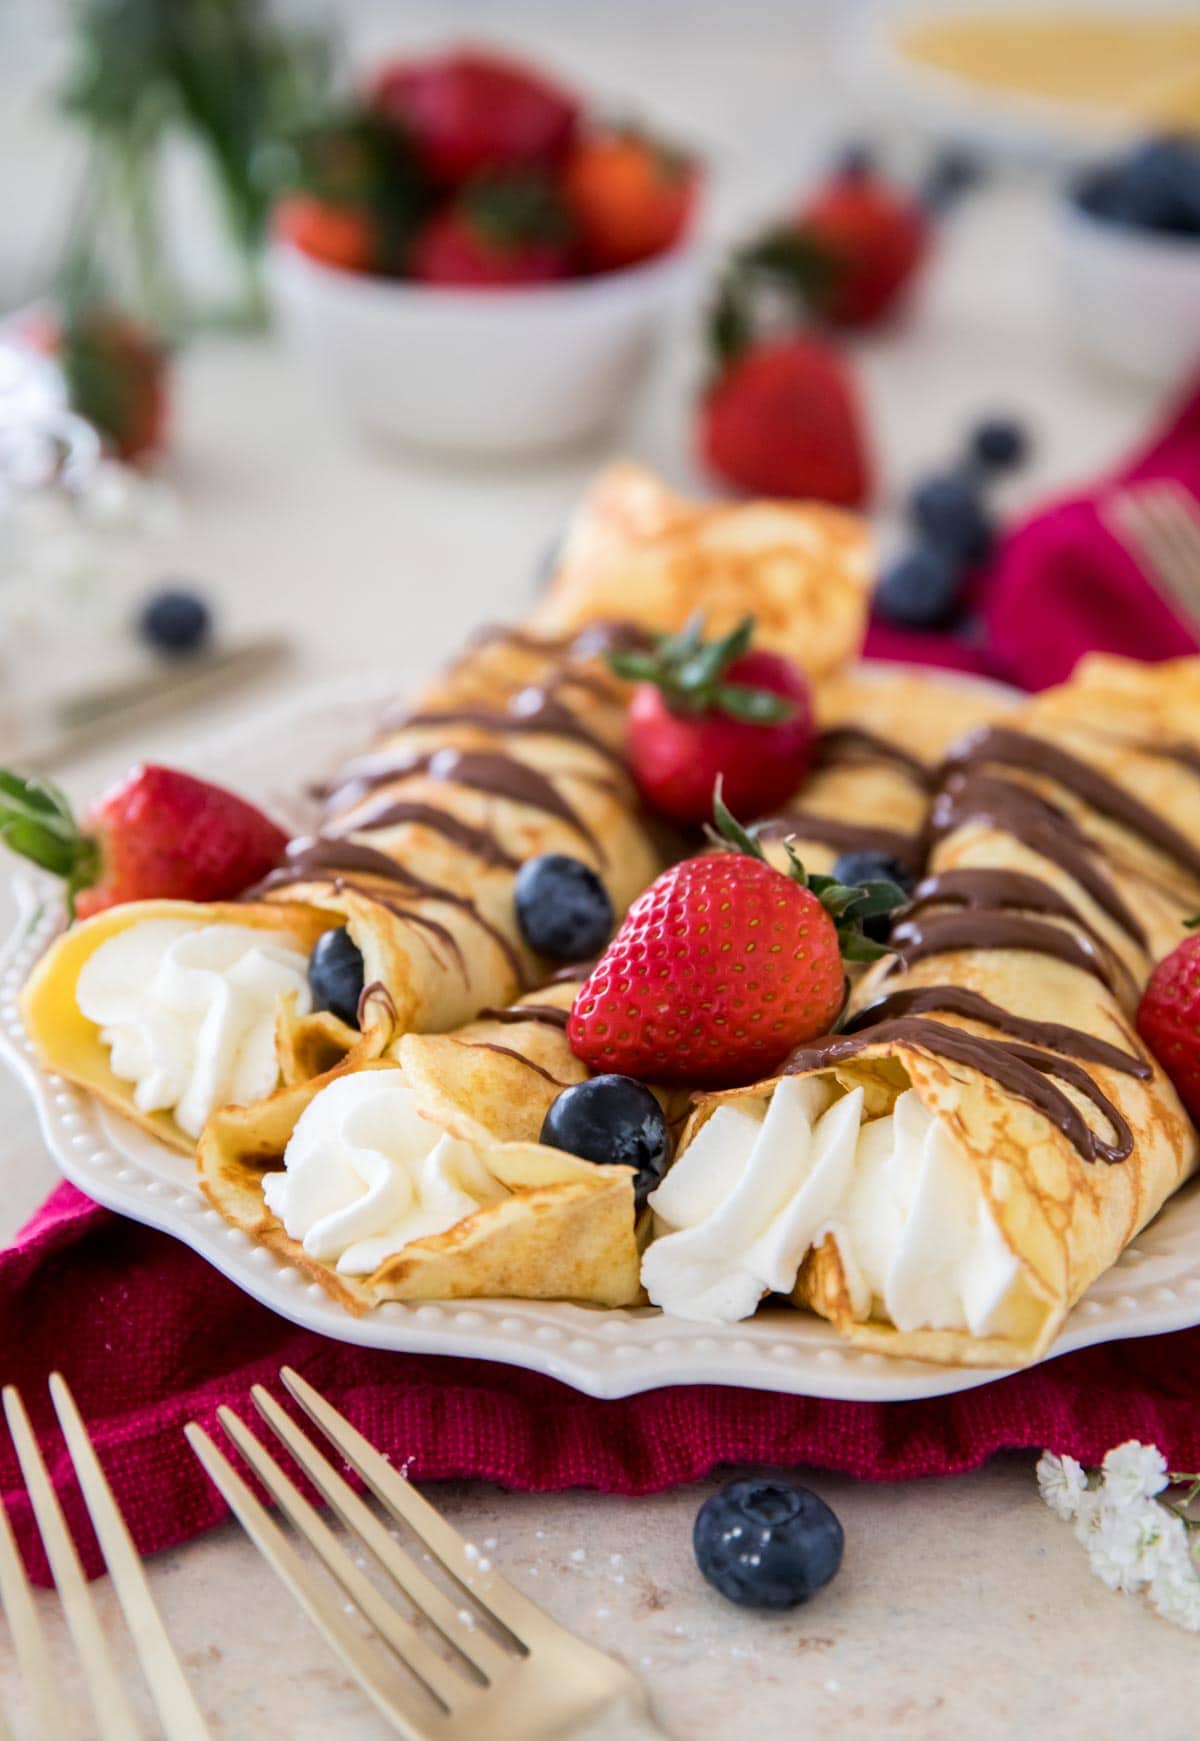 Crepes filled with whipped cream, drizzled with nutella and topped with berries